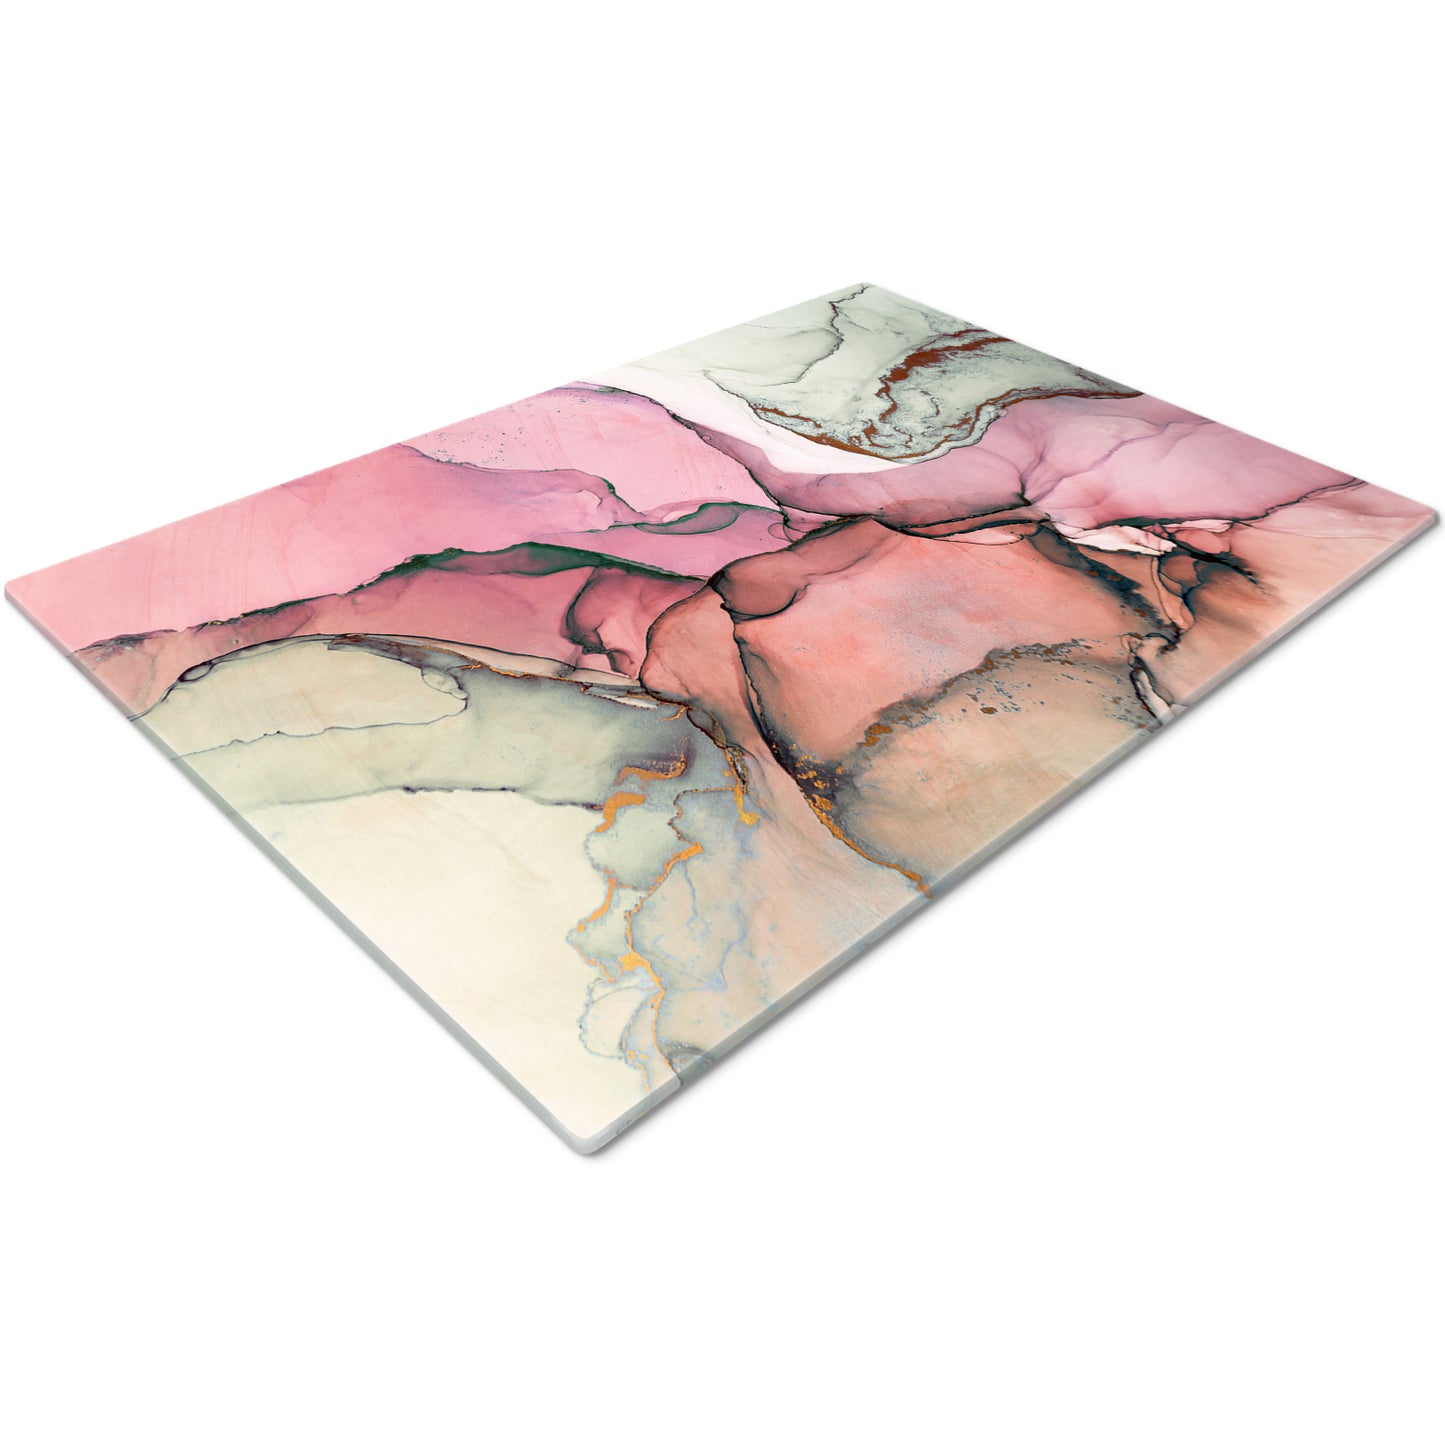 Glass Chopping Board For Kitchen Grey Pink Marble Print Design 2